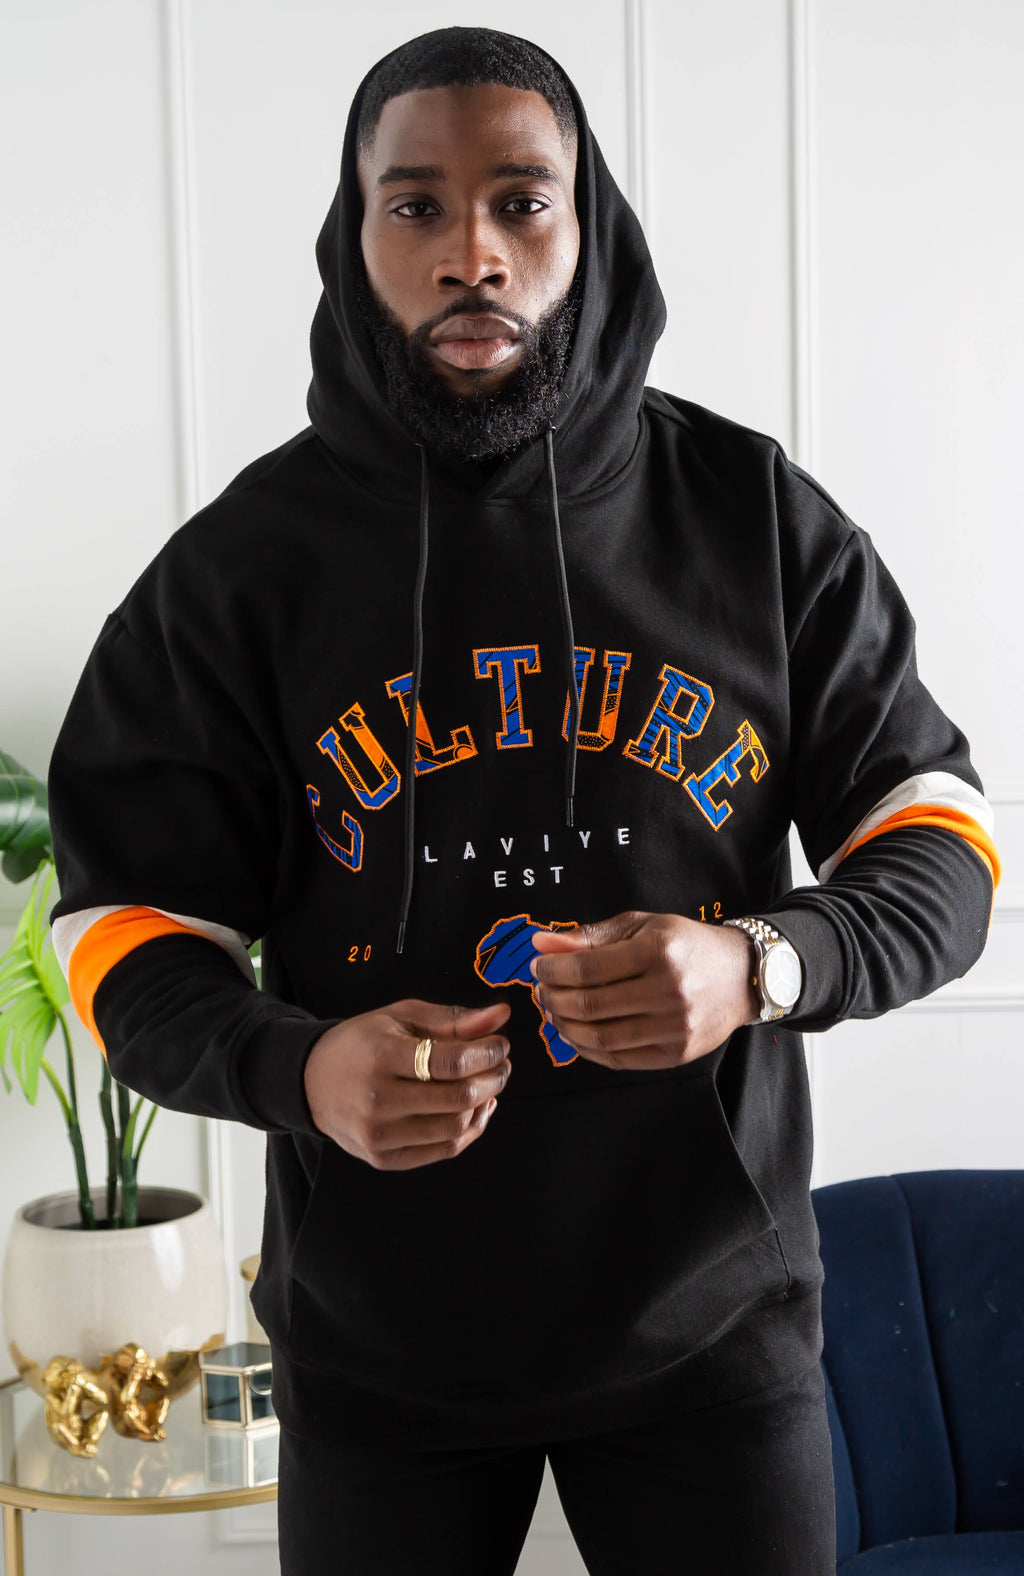 Hoodie Do it for the culture by nhcreativ - Men Hoodies - Afrikrea